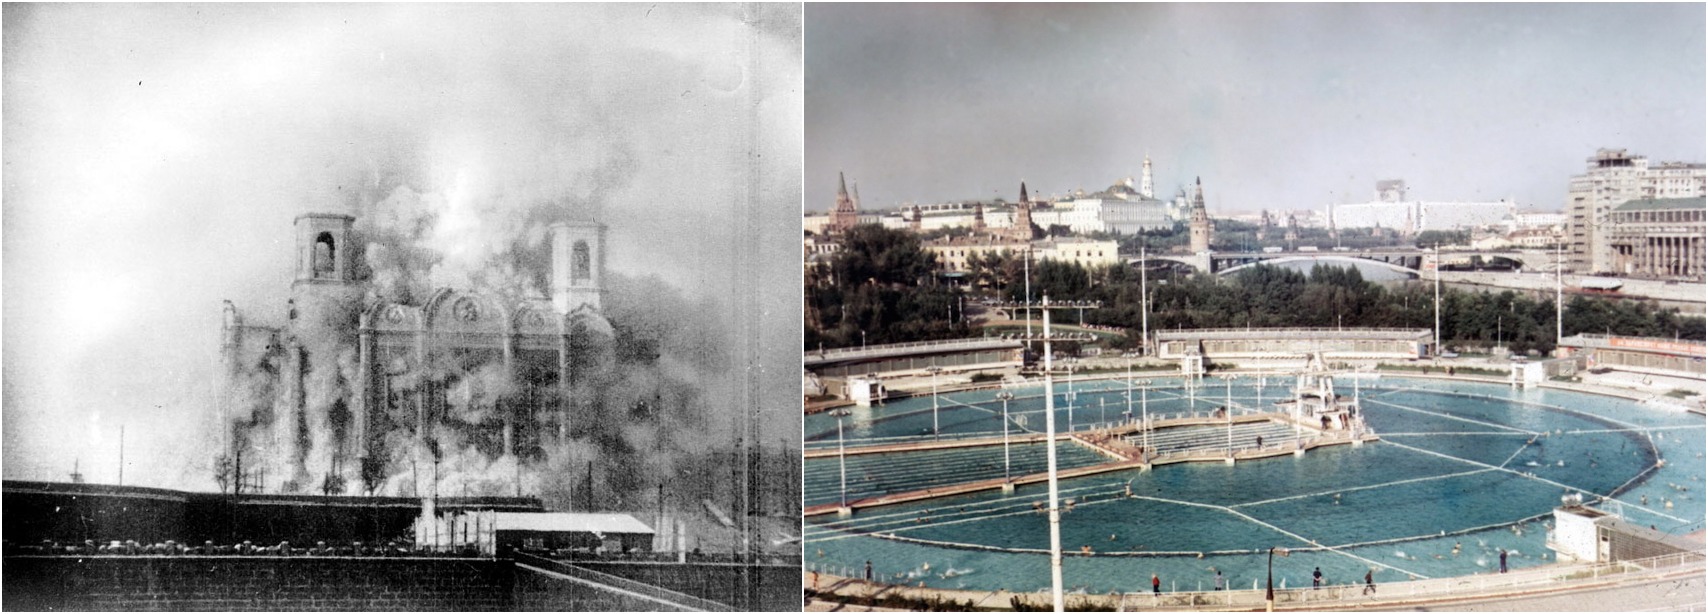 The demolition of the Cathedral of Christ the Savior